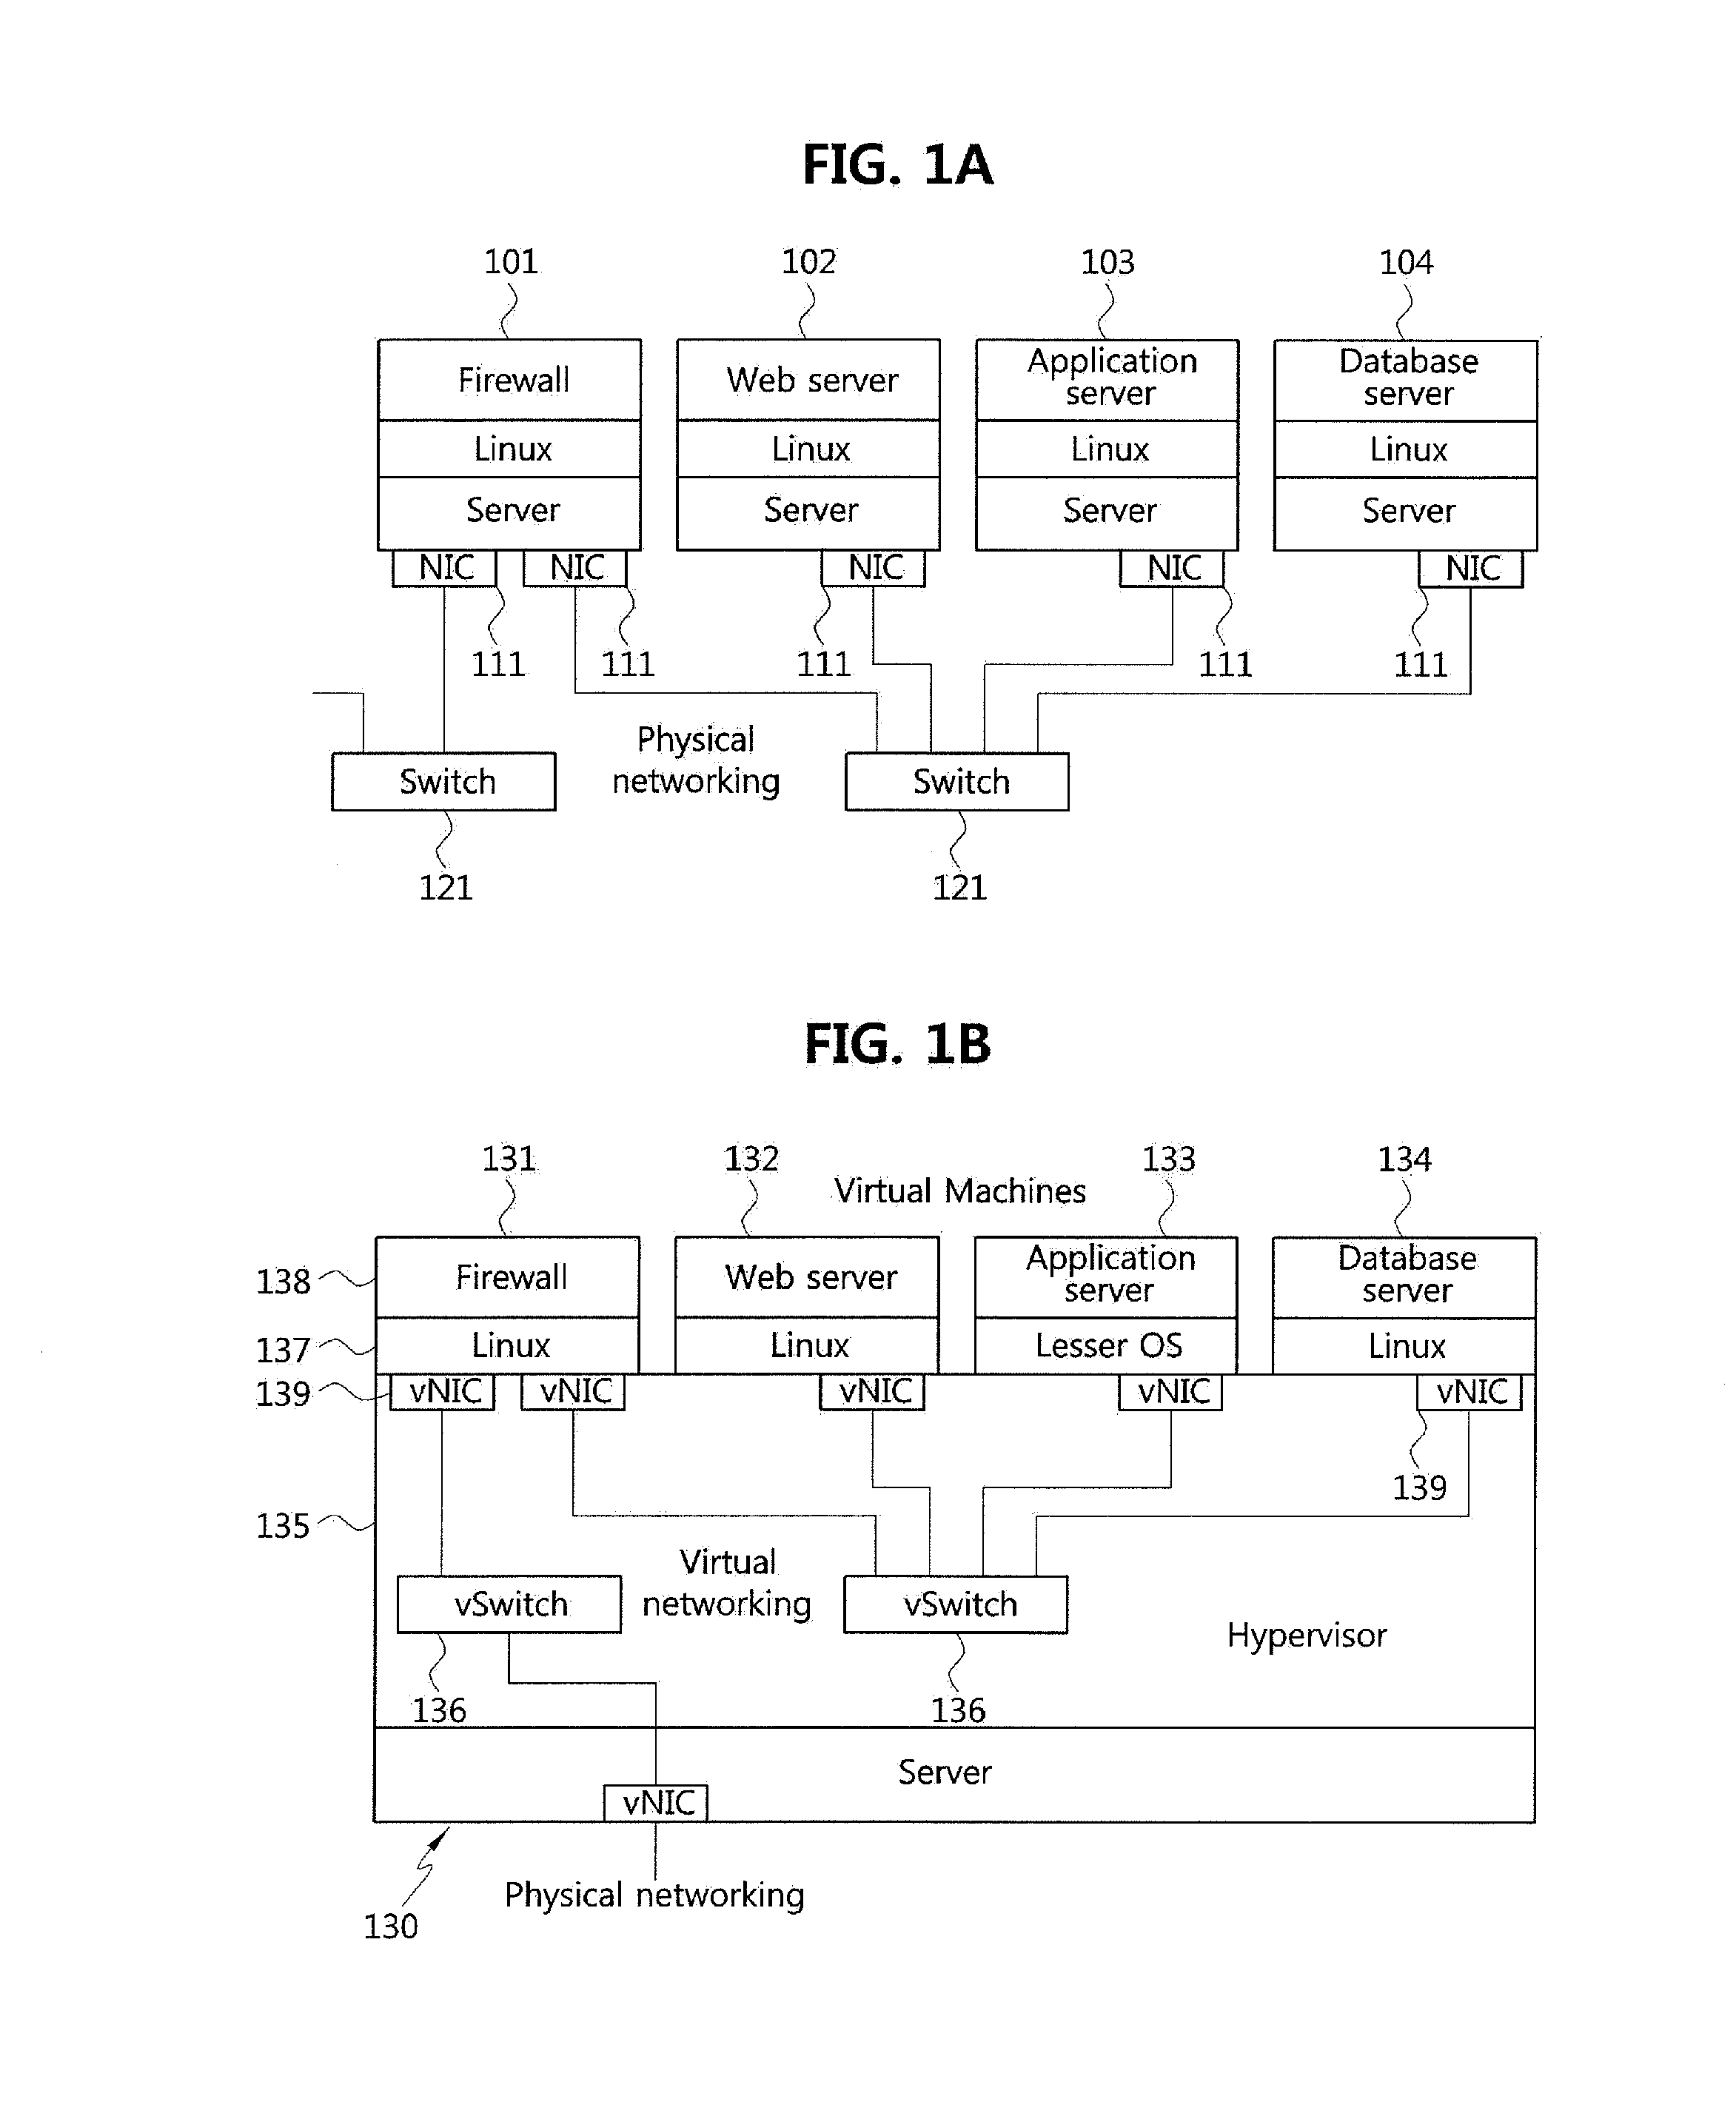 Method for implementing network using distributed virtual switch, apparatus for performing the same, and network system based on distributed virtual switch